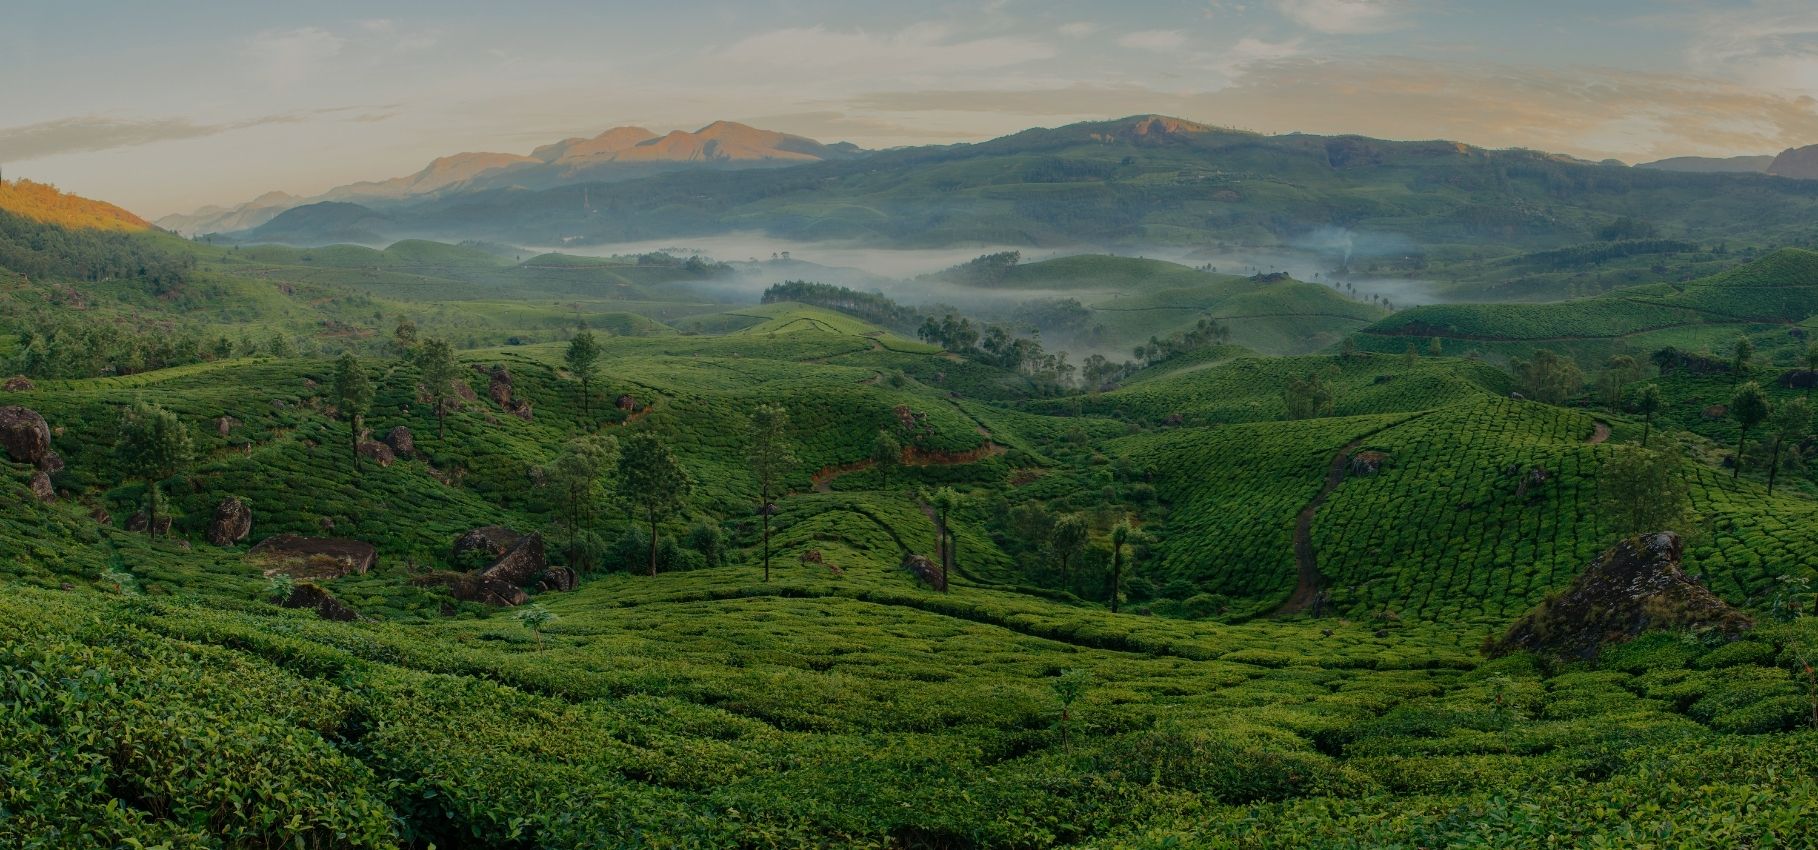 Best places to visit in and around Munnar, India